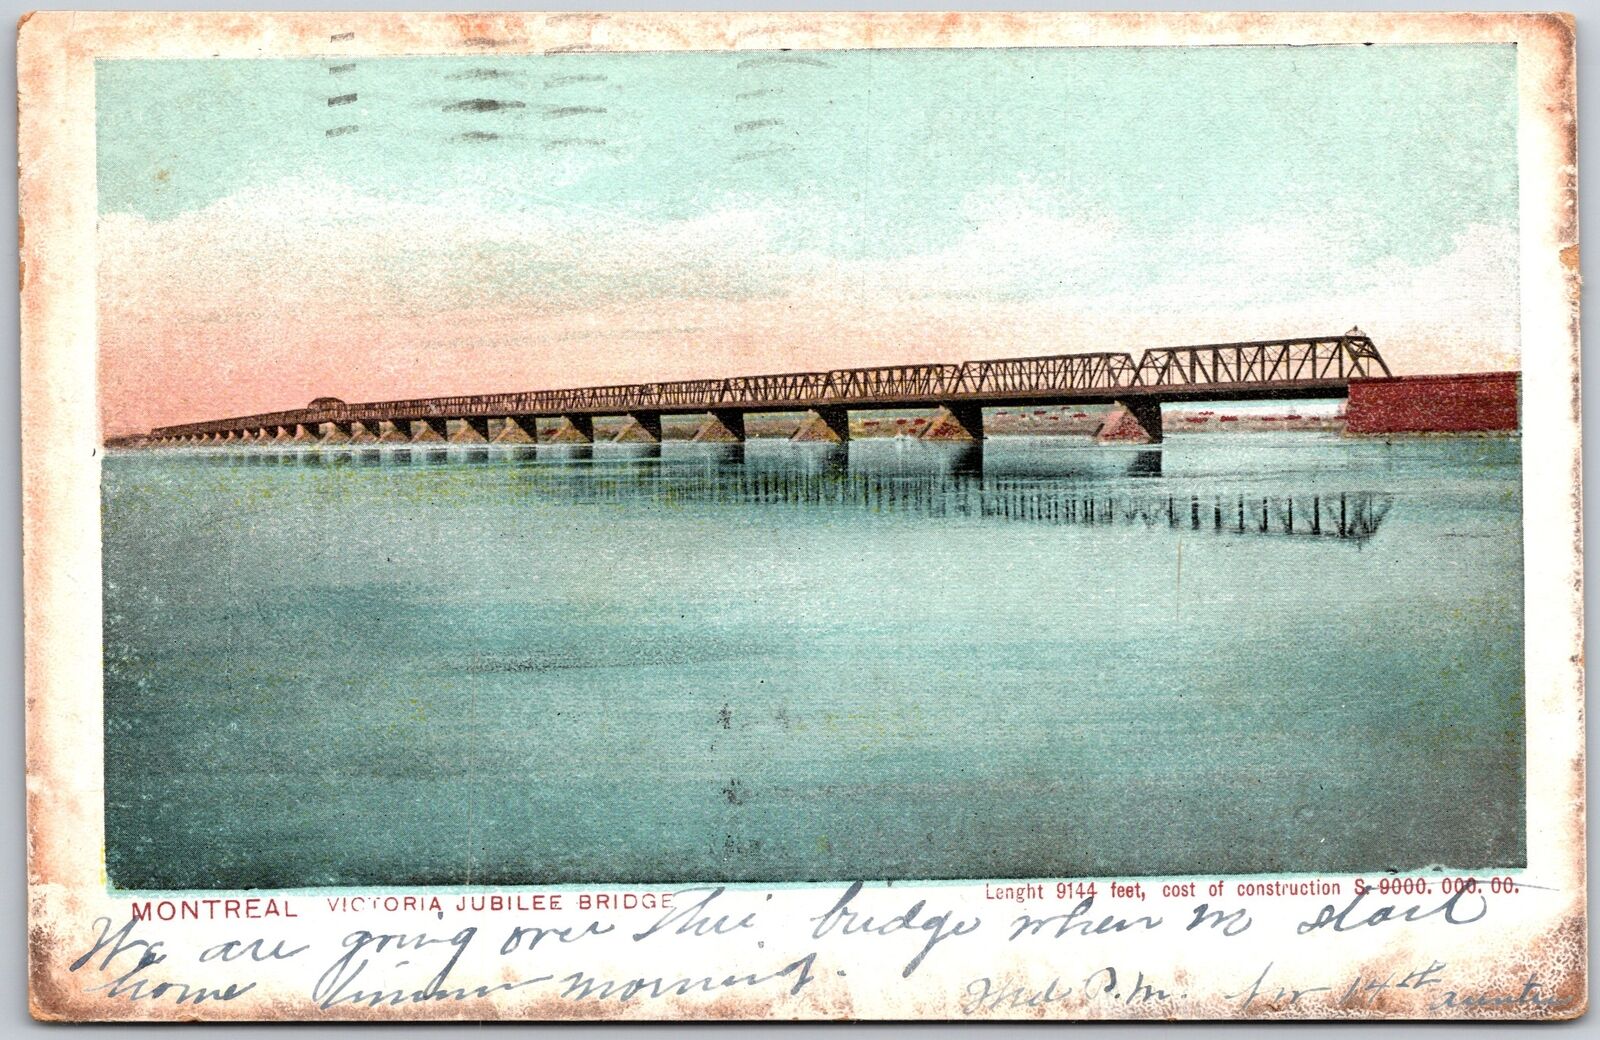 1906 Victoria Jubilee Bridge Montreal Canada St. Lawrence River Posted Postcard